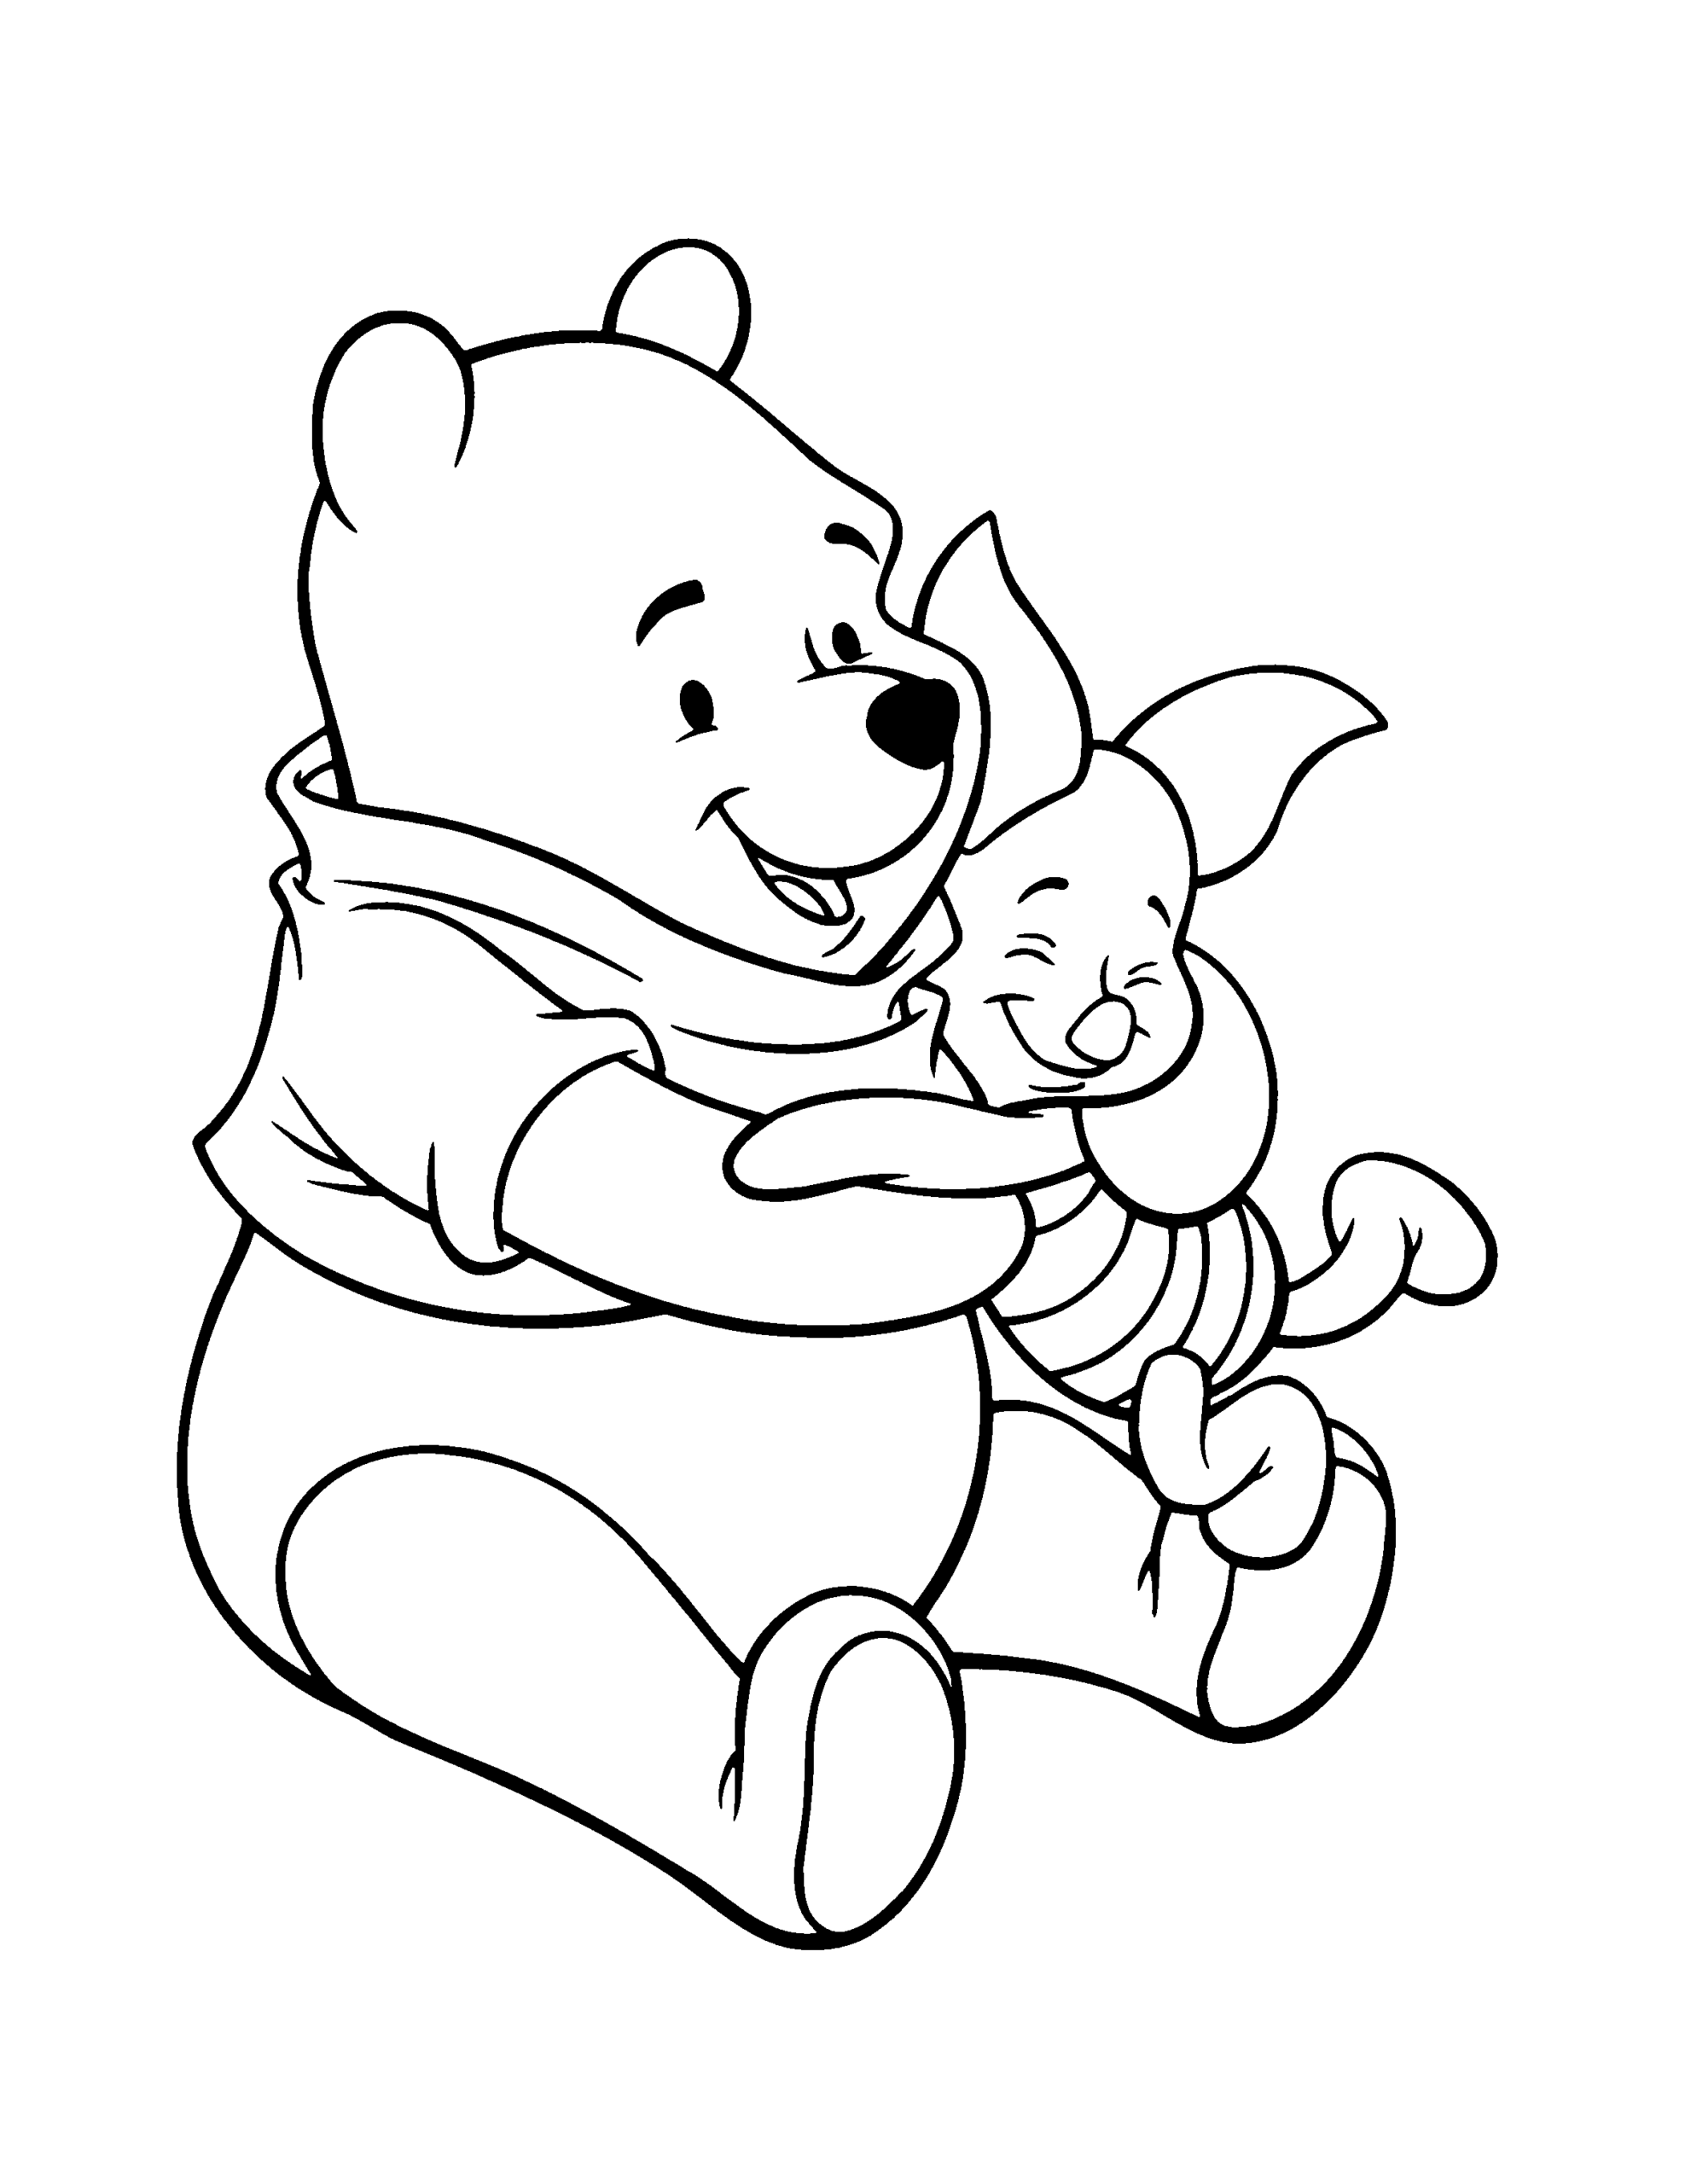 Winnie the Pooh Coloring Pages Cartoons winnie the pooh 57 Printable 2020 7172 Coloring4free